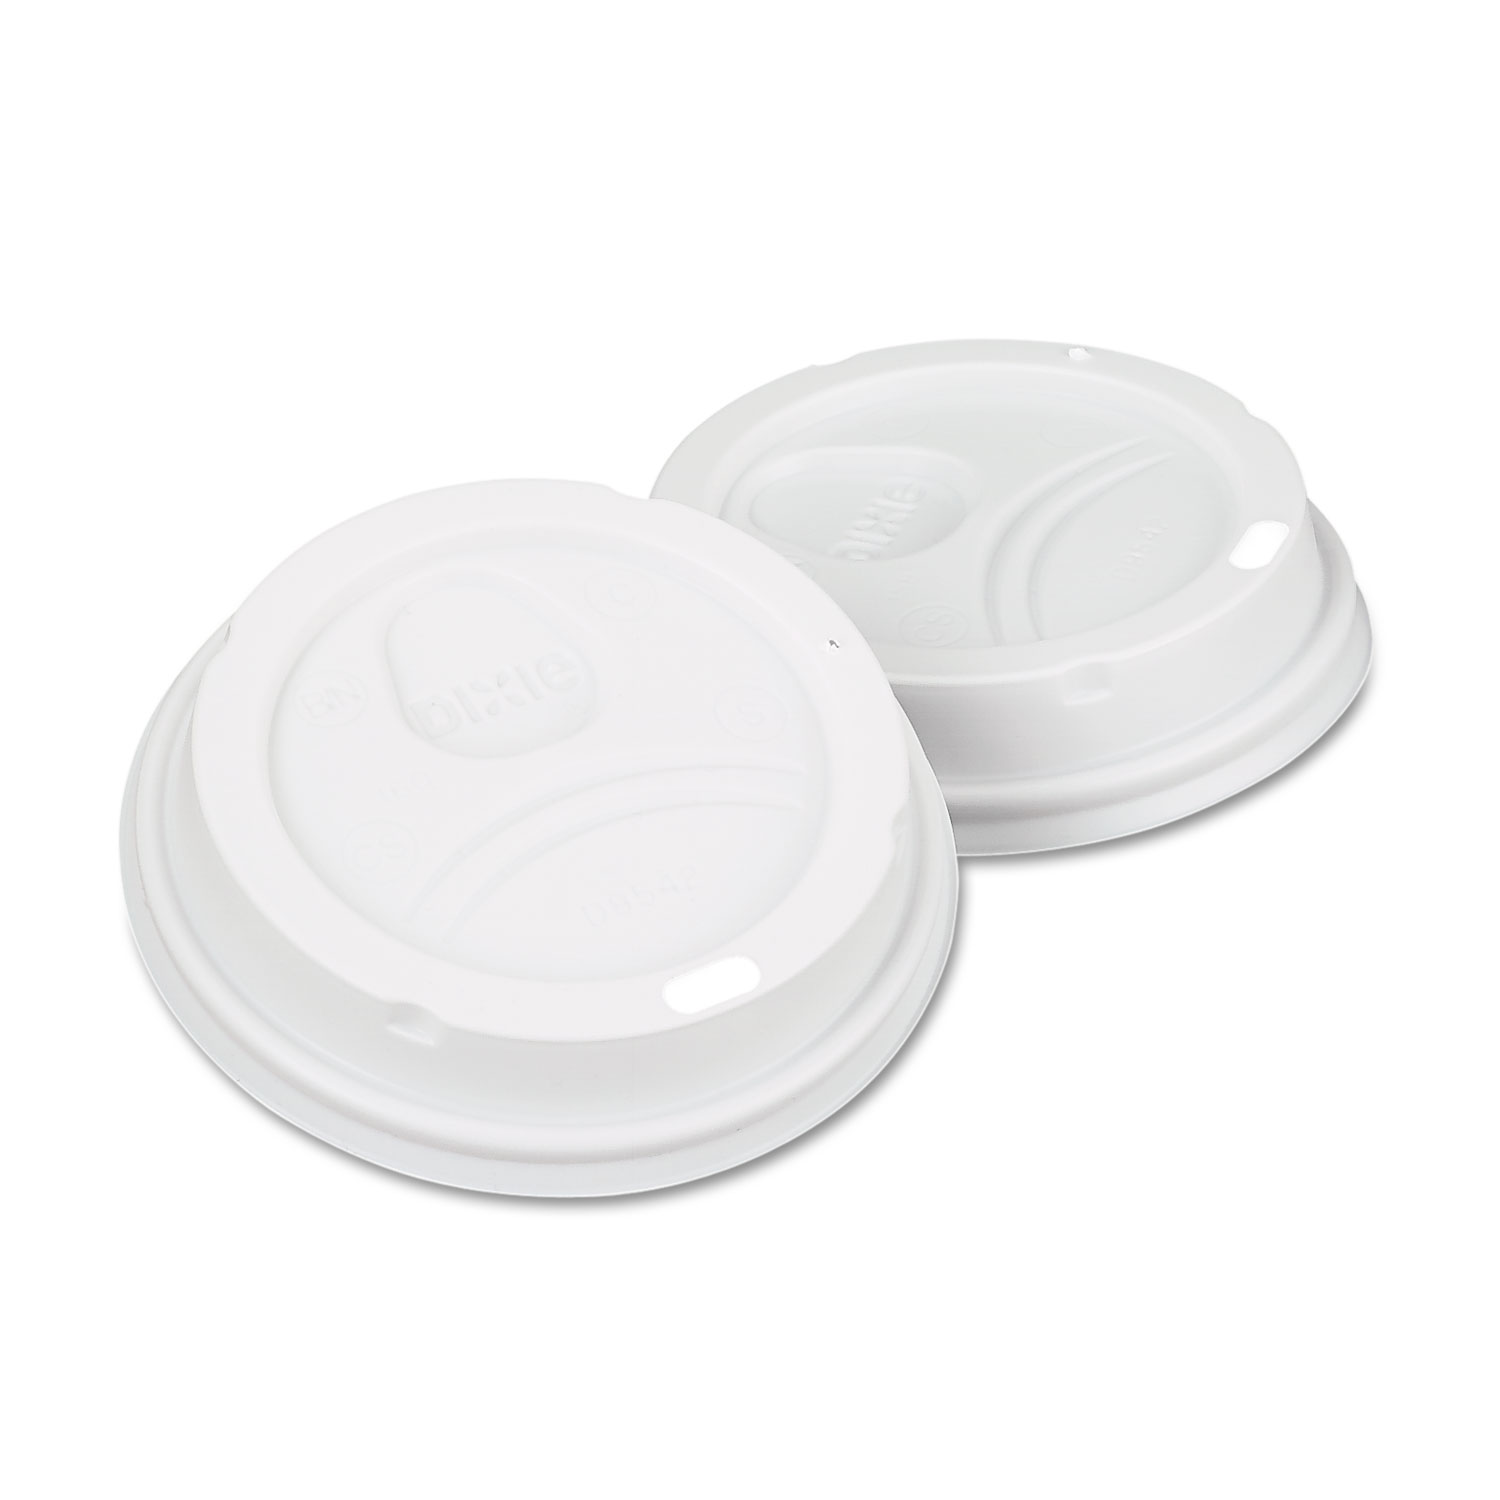  Dixie 9542500DX White Dome Lid Fits 10-16oz Perfectouch Cups, 12-20oz Hot Cups, WiseSize, 500/CT (DXE9542500DXCT) 